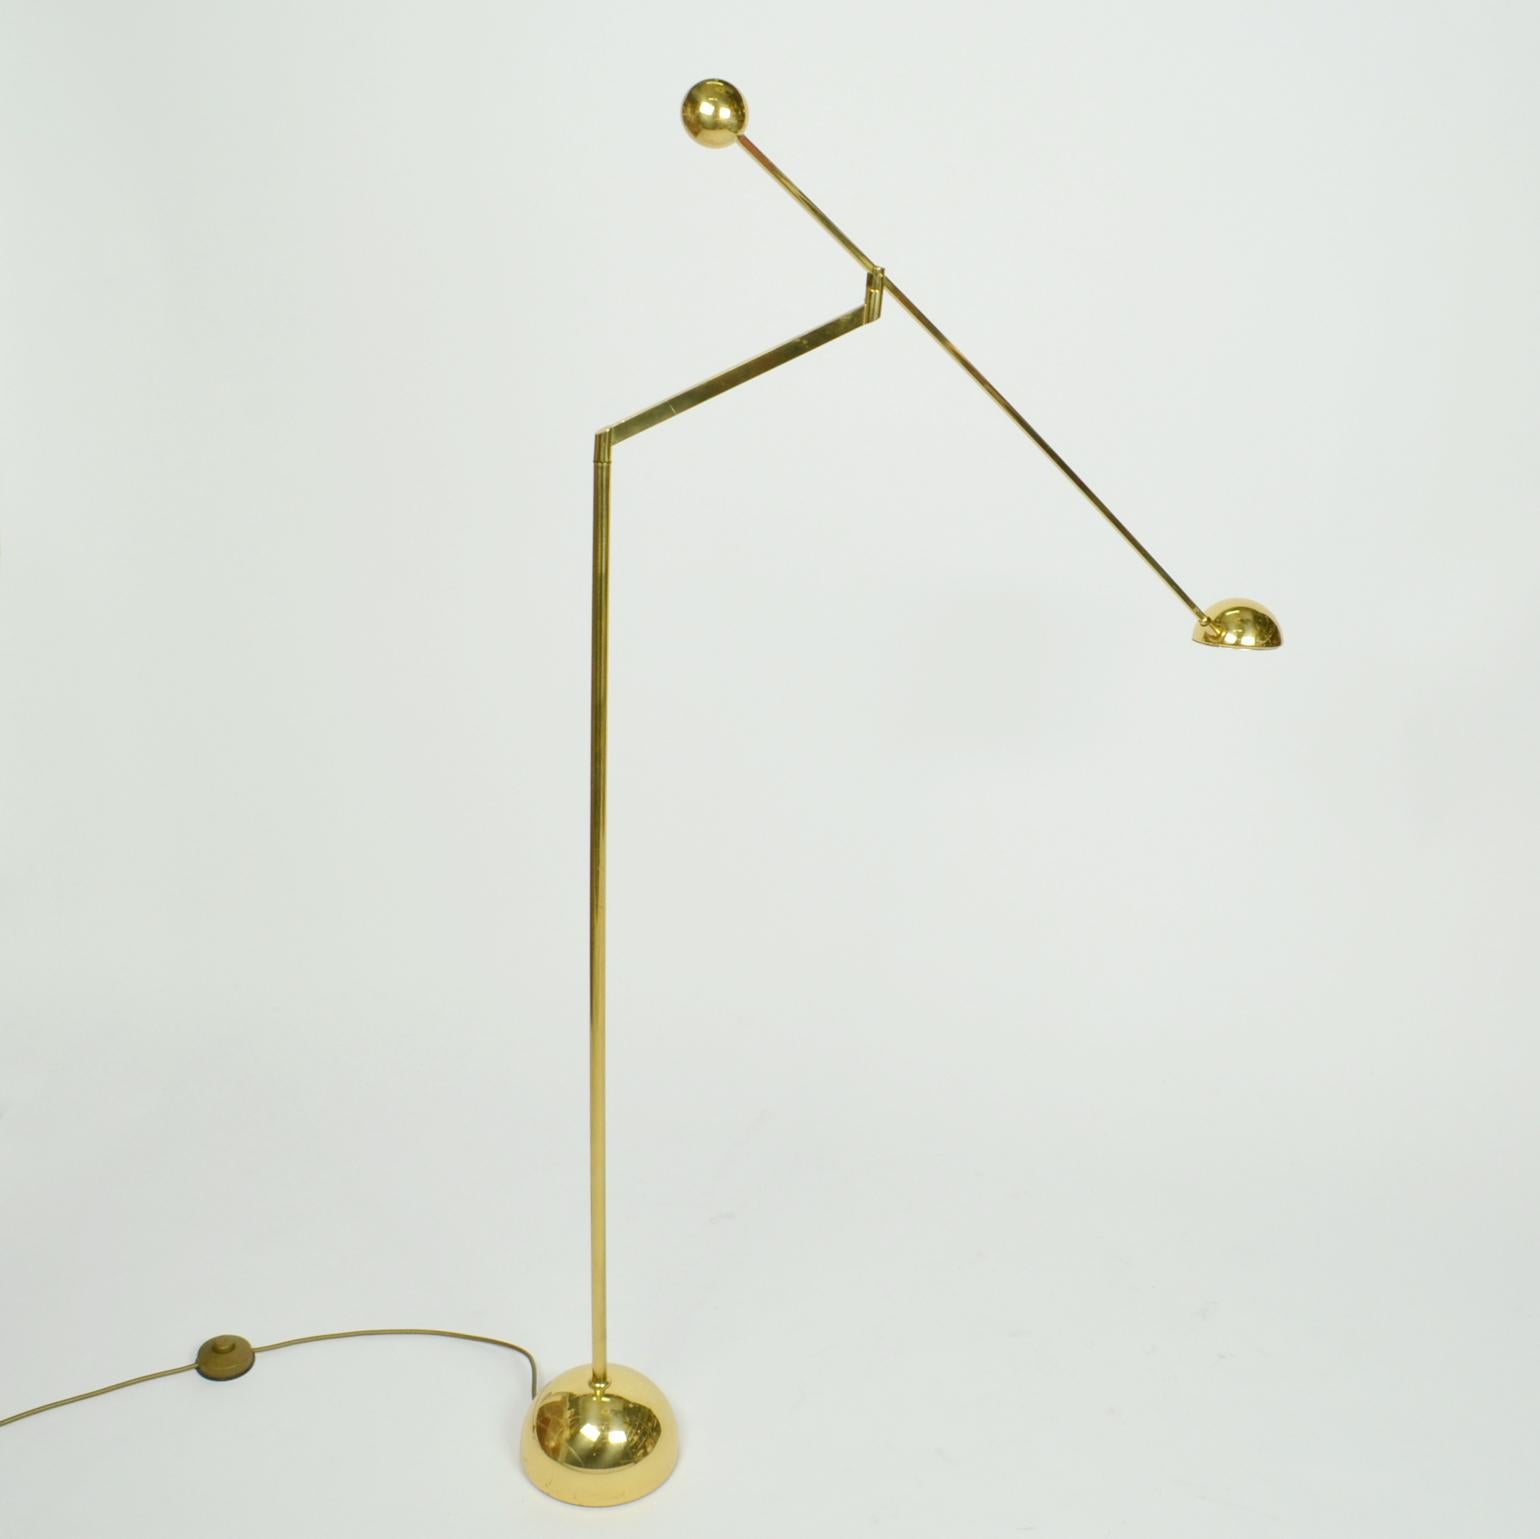 Minimal Brass Counter Balance 1970sFloor Lamp In Excellent Condition For Sale In London, GB